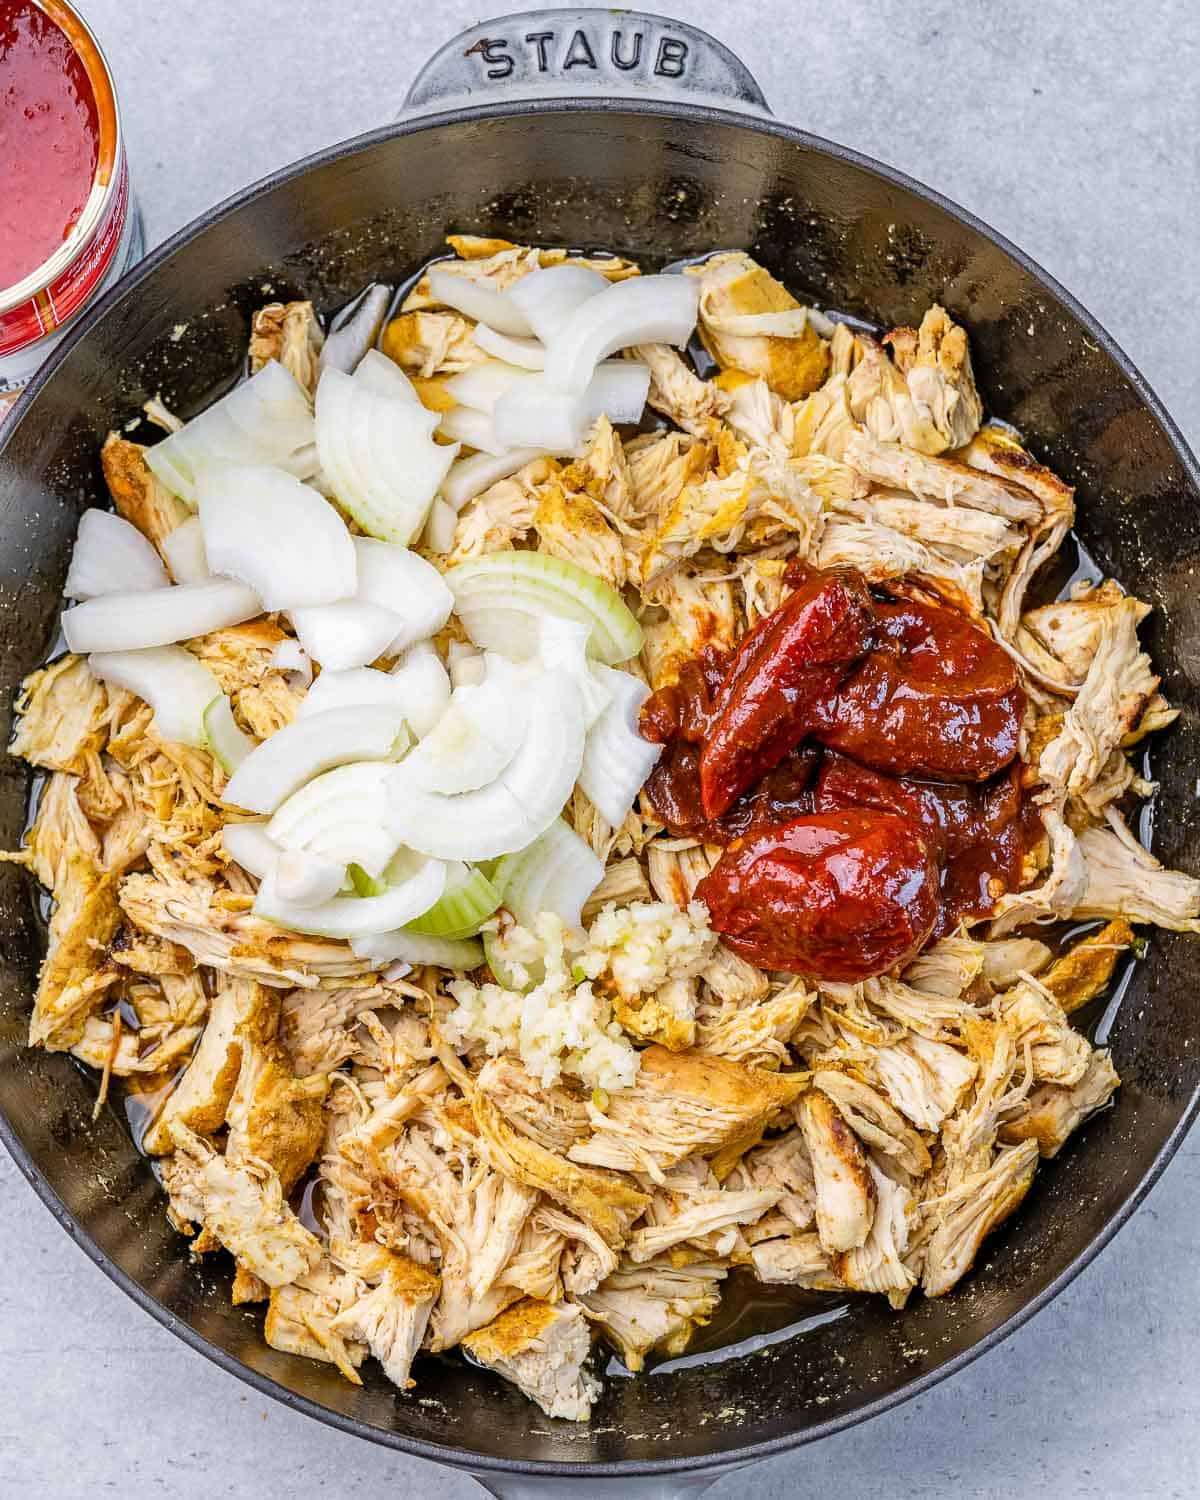 Add chipotle peppers and onions to shredded chicken.